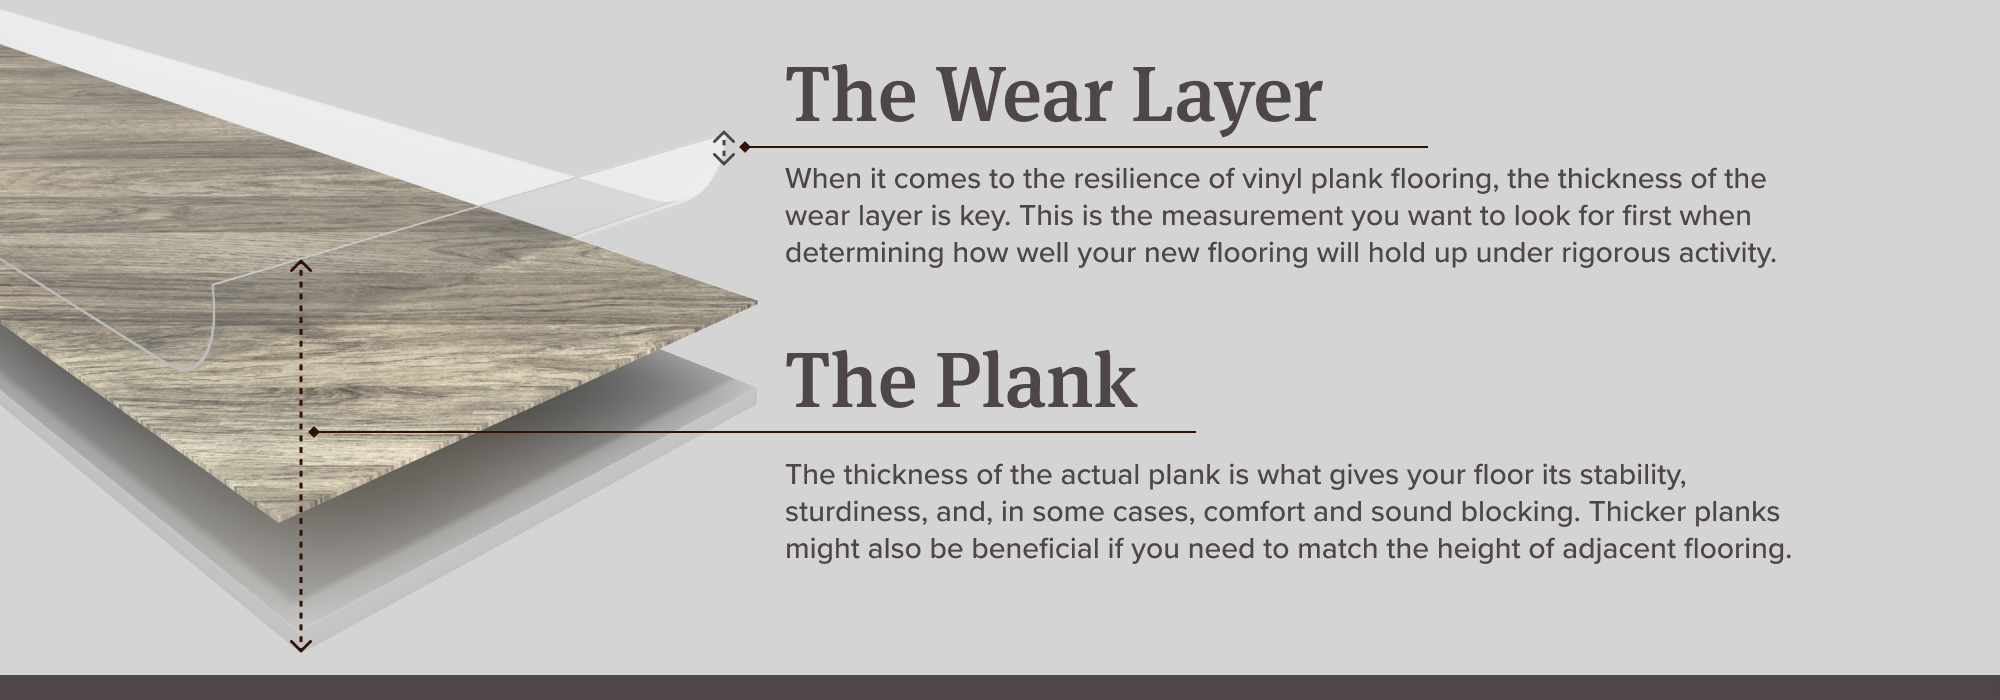 graphic showing protective layers of vinyl plank